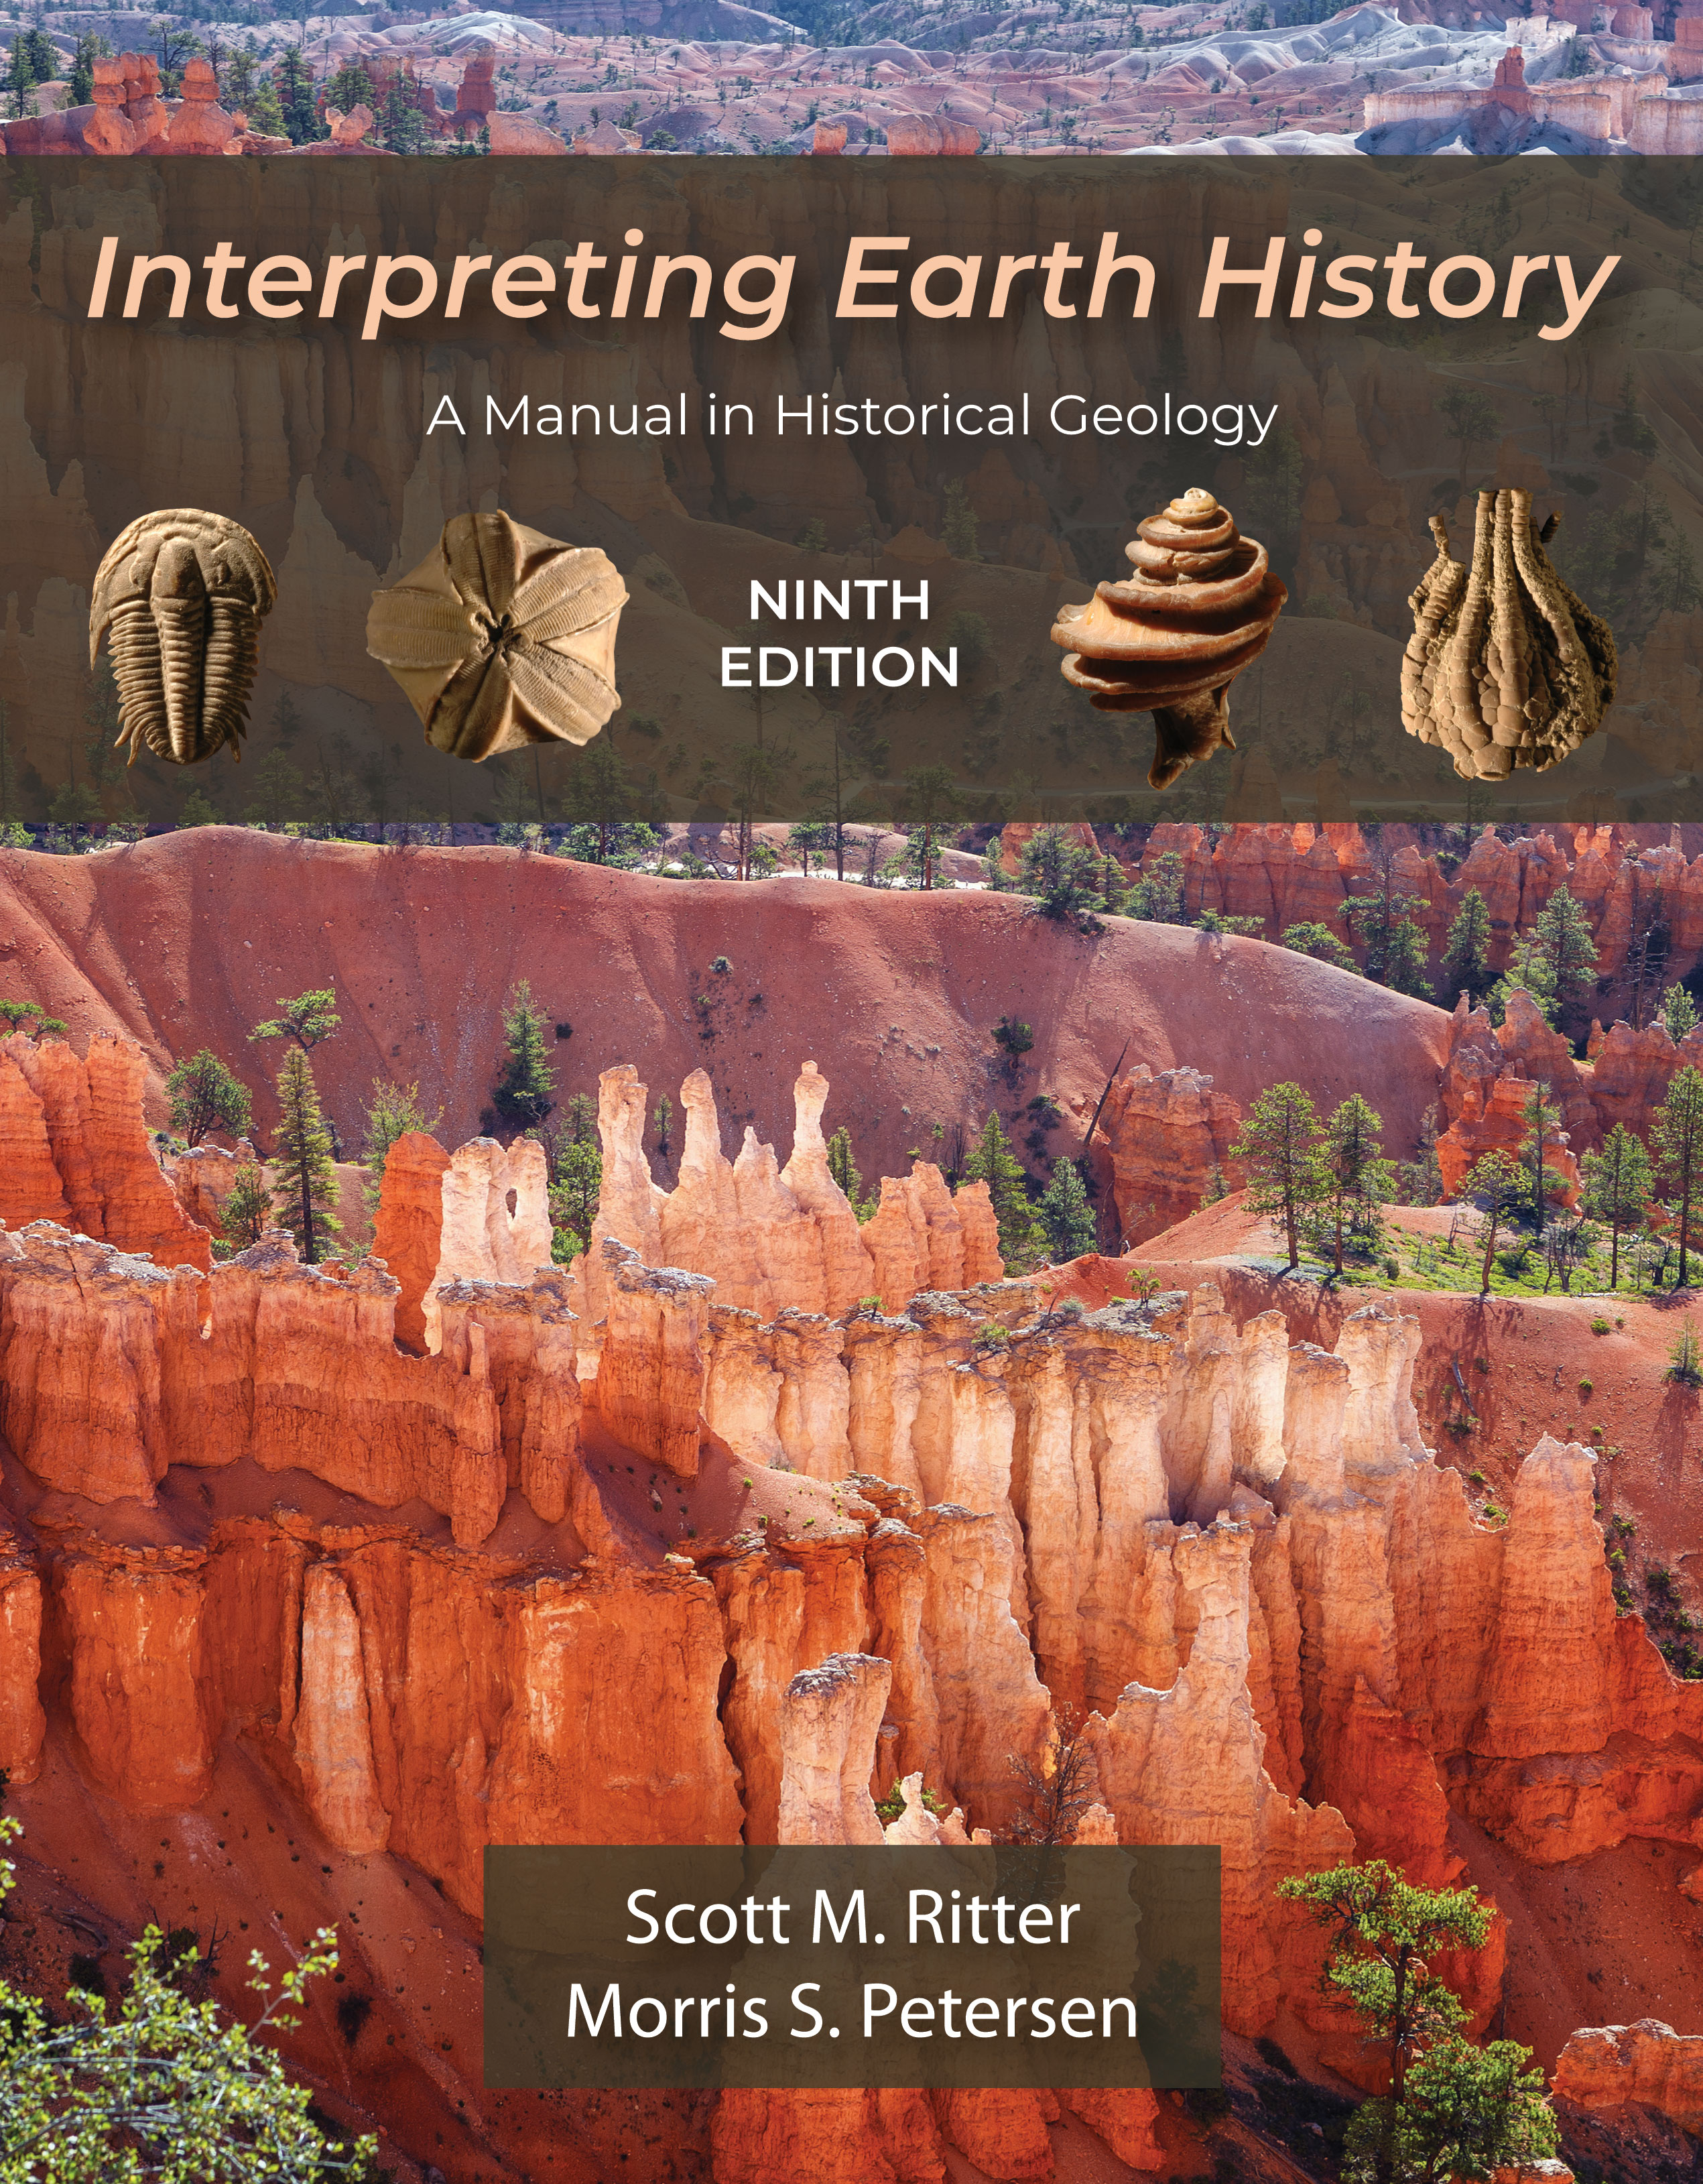 Interpreting Earth History: A Manual in Historical Geology, Ninth Edition by Scott  Ritter, Morris  Petersen